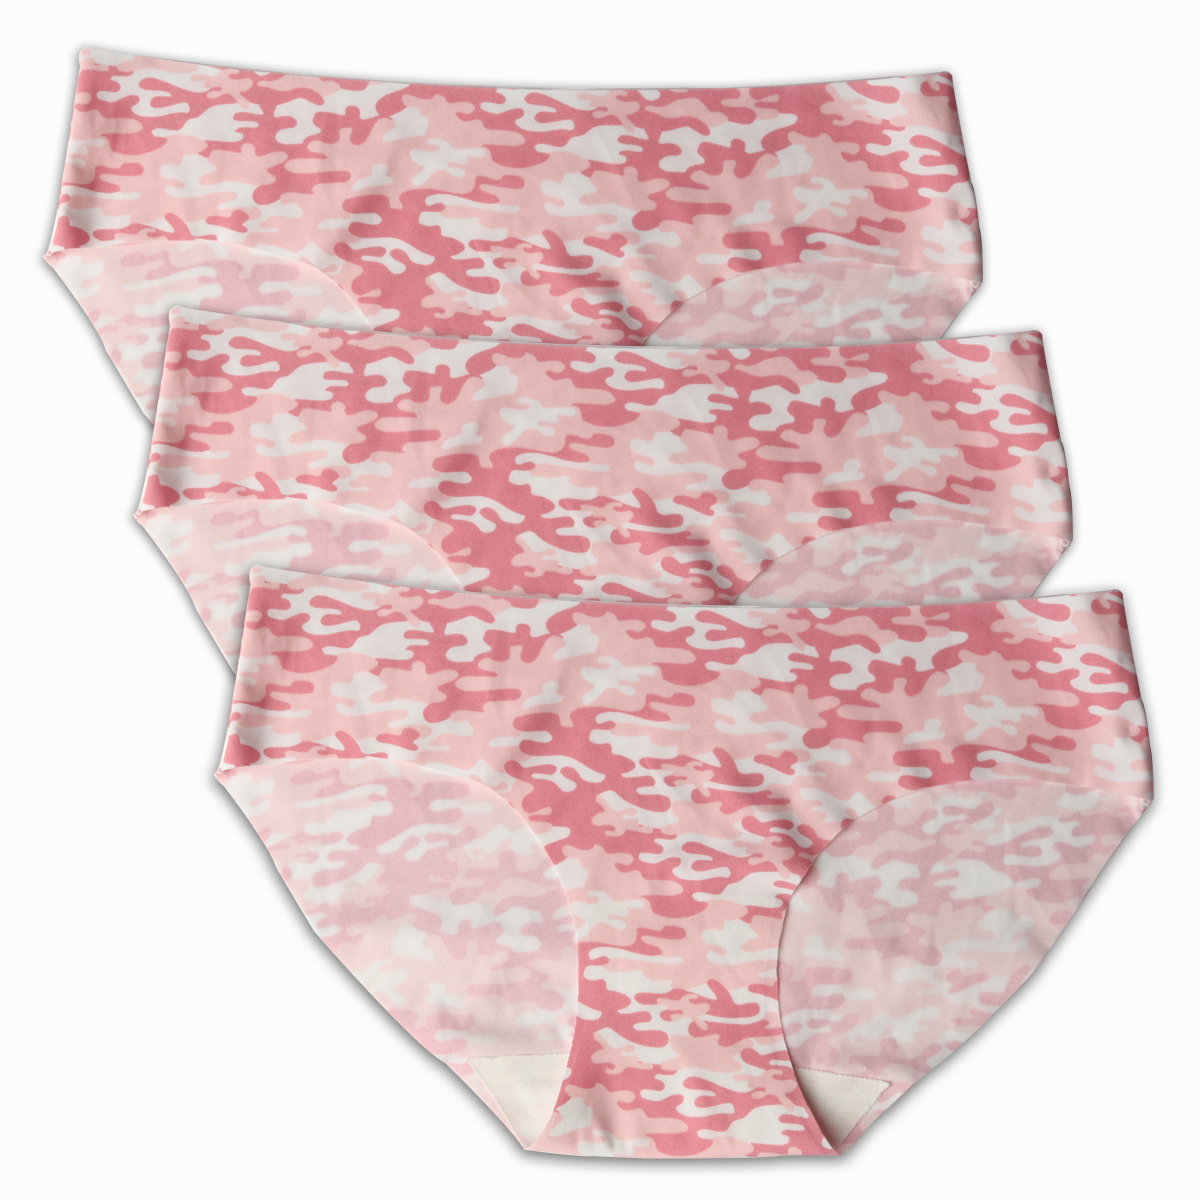 CODE RED period Panties Underwear With Pocket- Red L